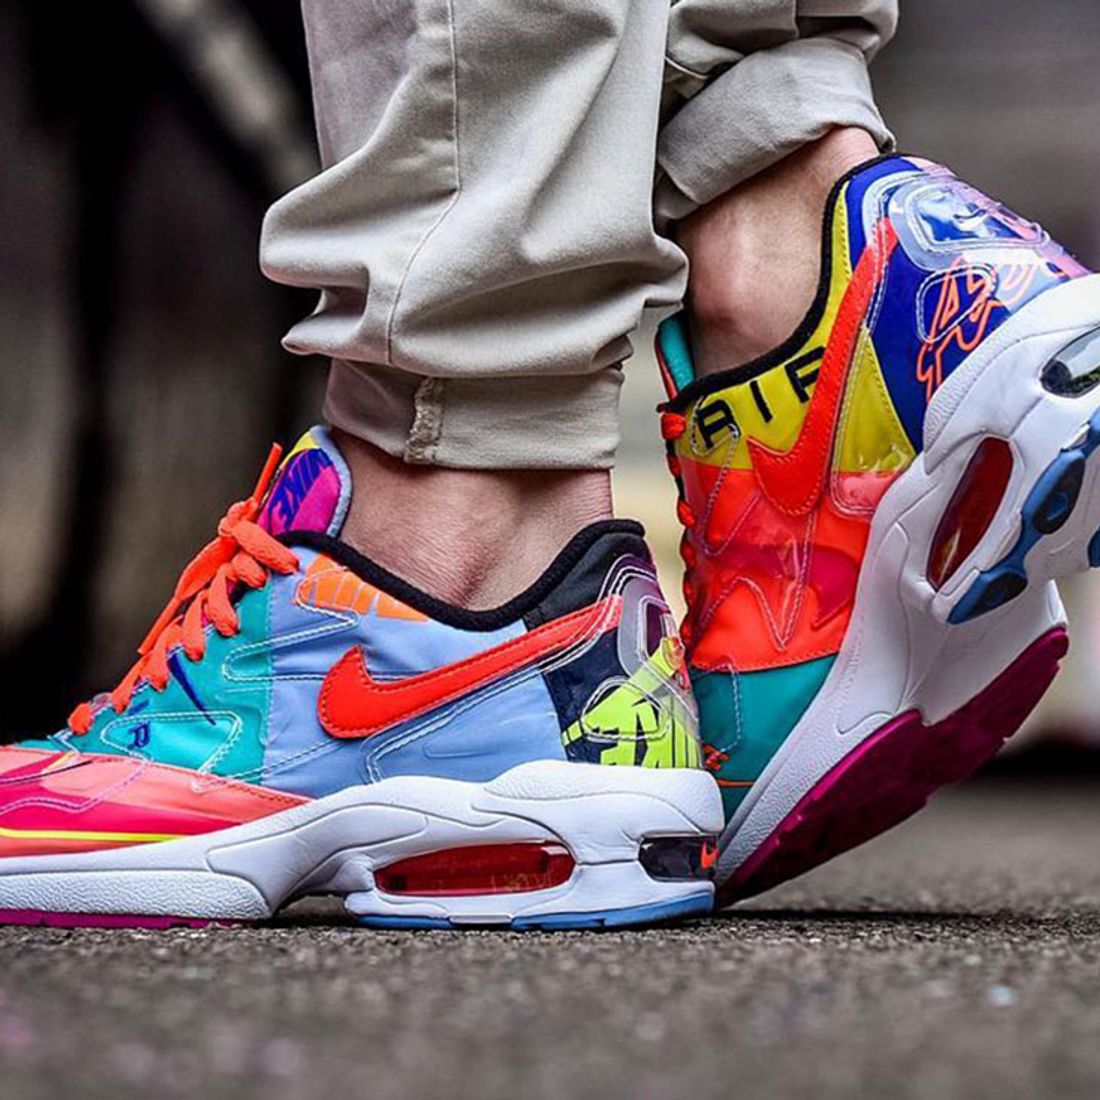 Here's Are Styling the atmos Nike Max2 Light - Sneaker Freaker